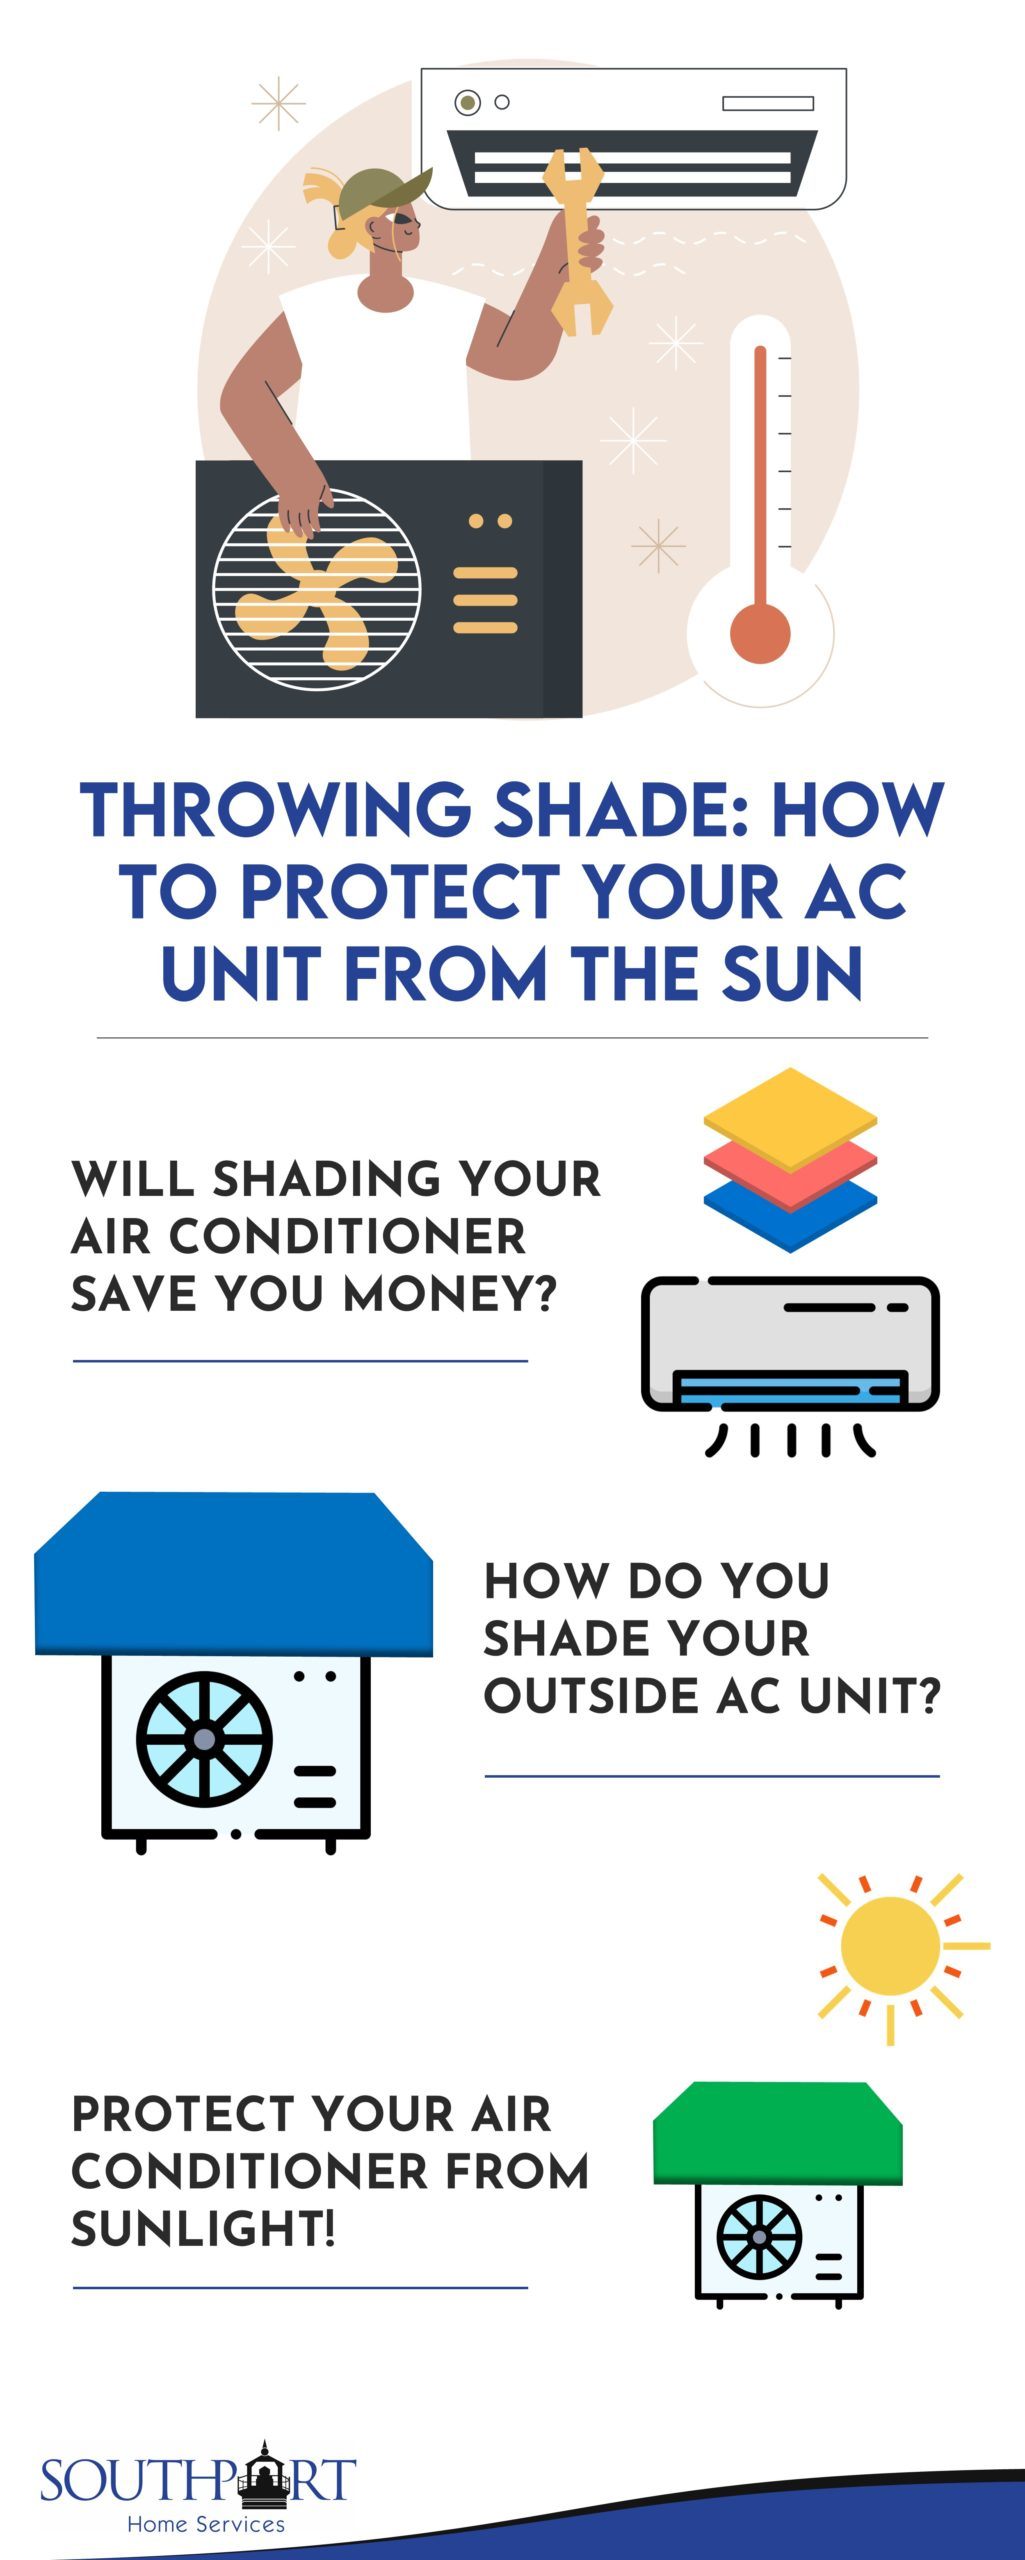 Throwing Shade: How To Protect Your AC Unit From the Sun